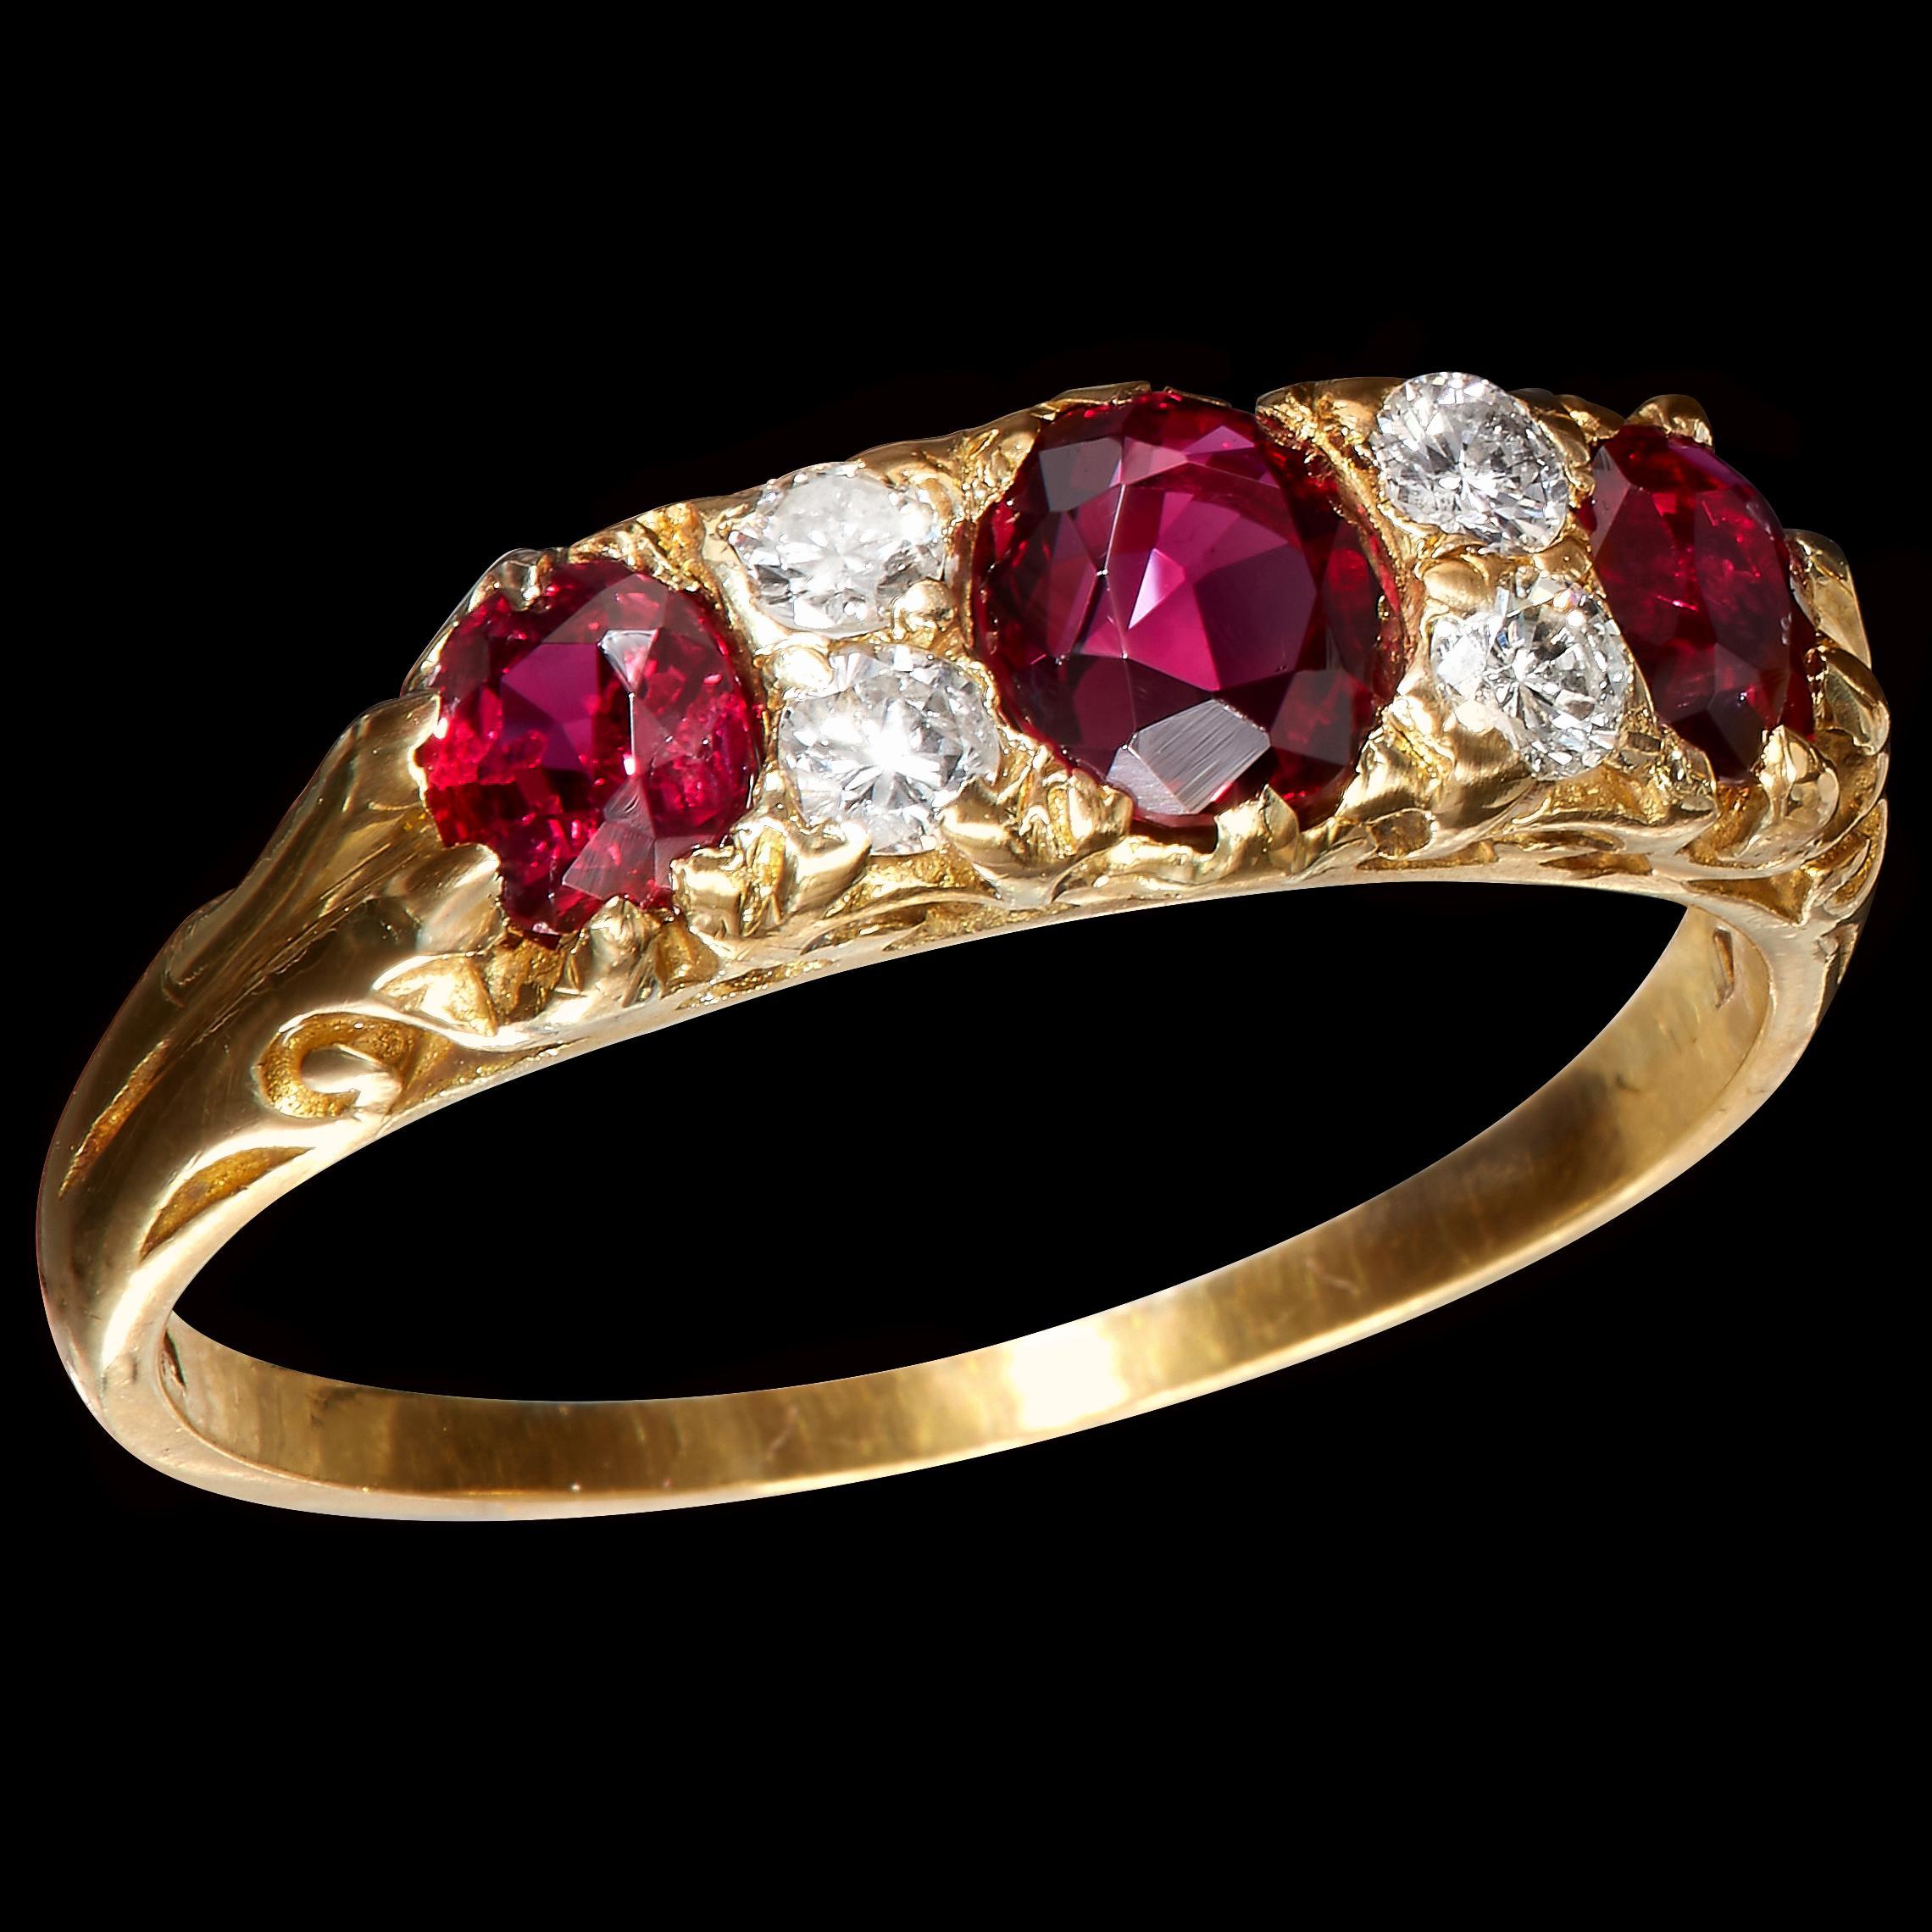 A Beautiful Classic VICTORIAN revival Trilogy Diamond Ring with Three SUPER RARE Gorgeous Ruby, create a hypnotic radiance and luster with splash of color.

Three bright faceted antique Oval Rubies are beyond words!! A NATURAL, NO HEAT in Deep